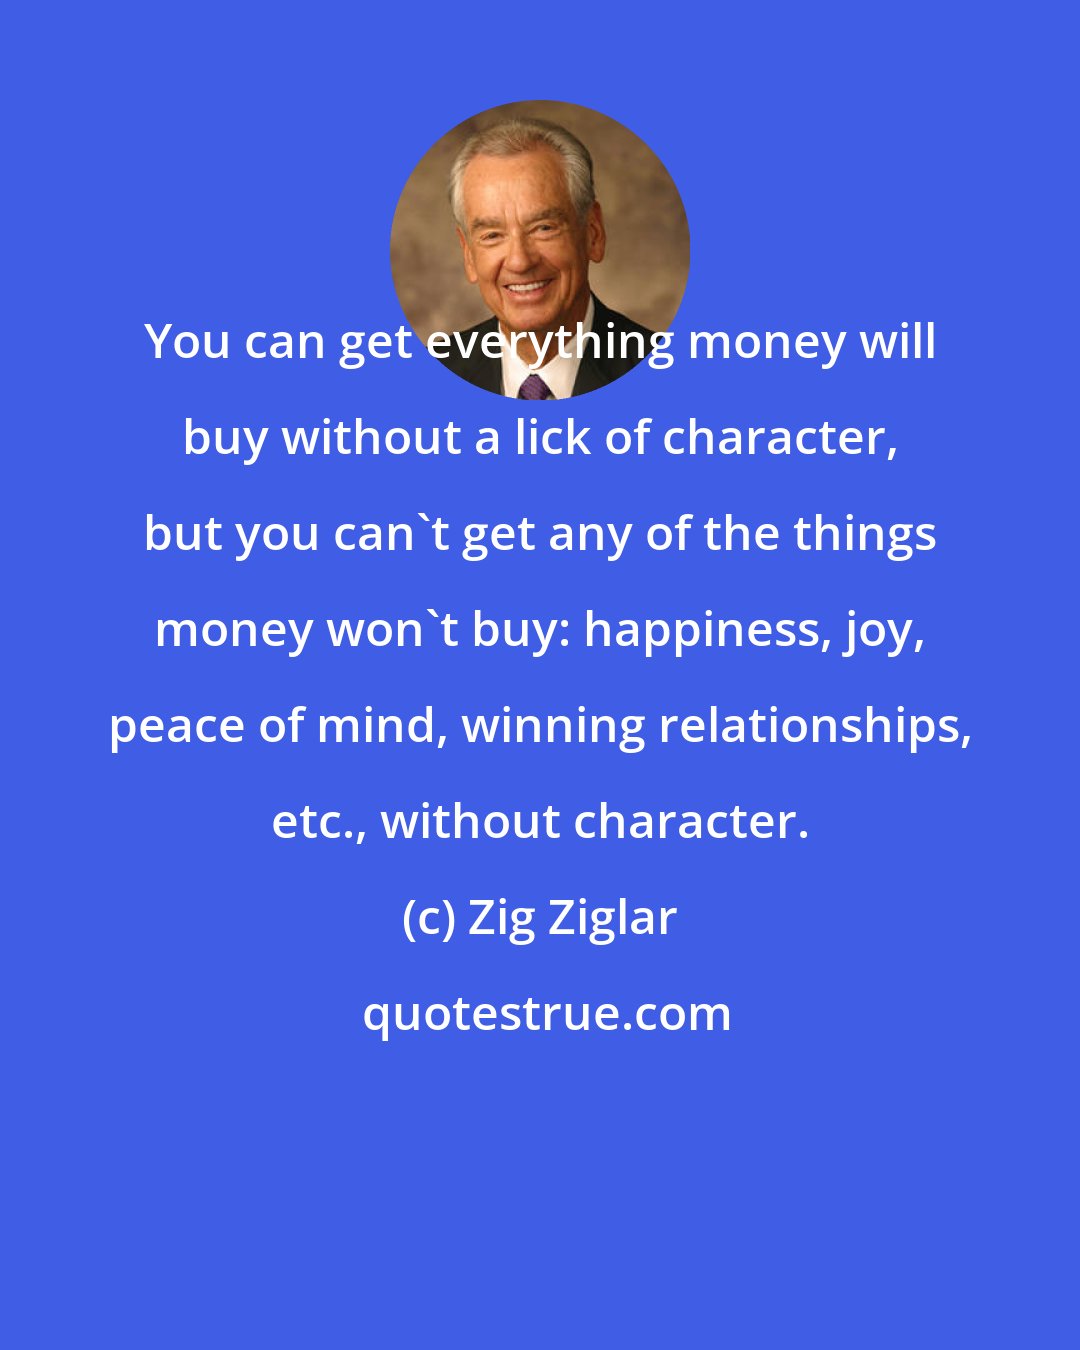 Zig Ziglar: You can get everything money will buy without a lick of character, but you can't get any of the things money won't buy: happiness, joy, peace of mind, winning relationships, etc., without character.